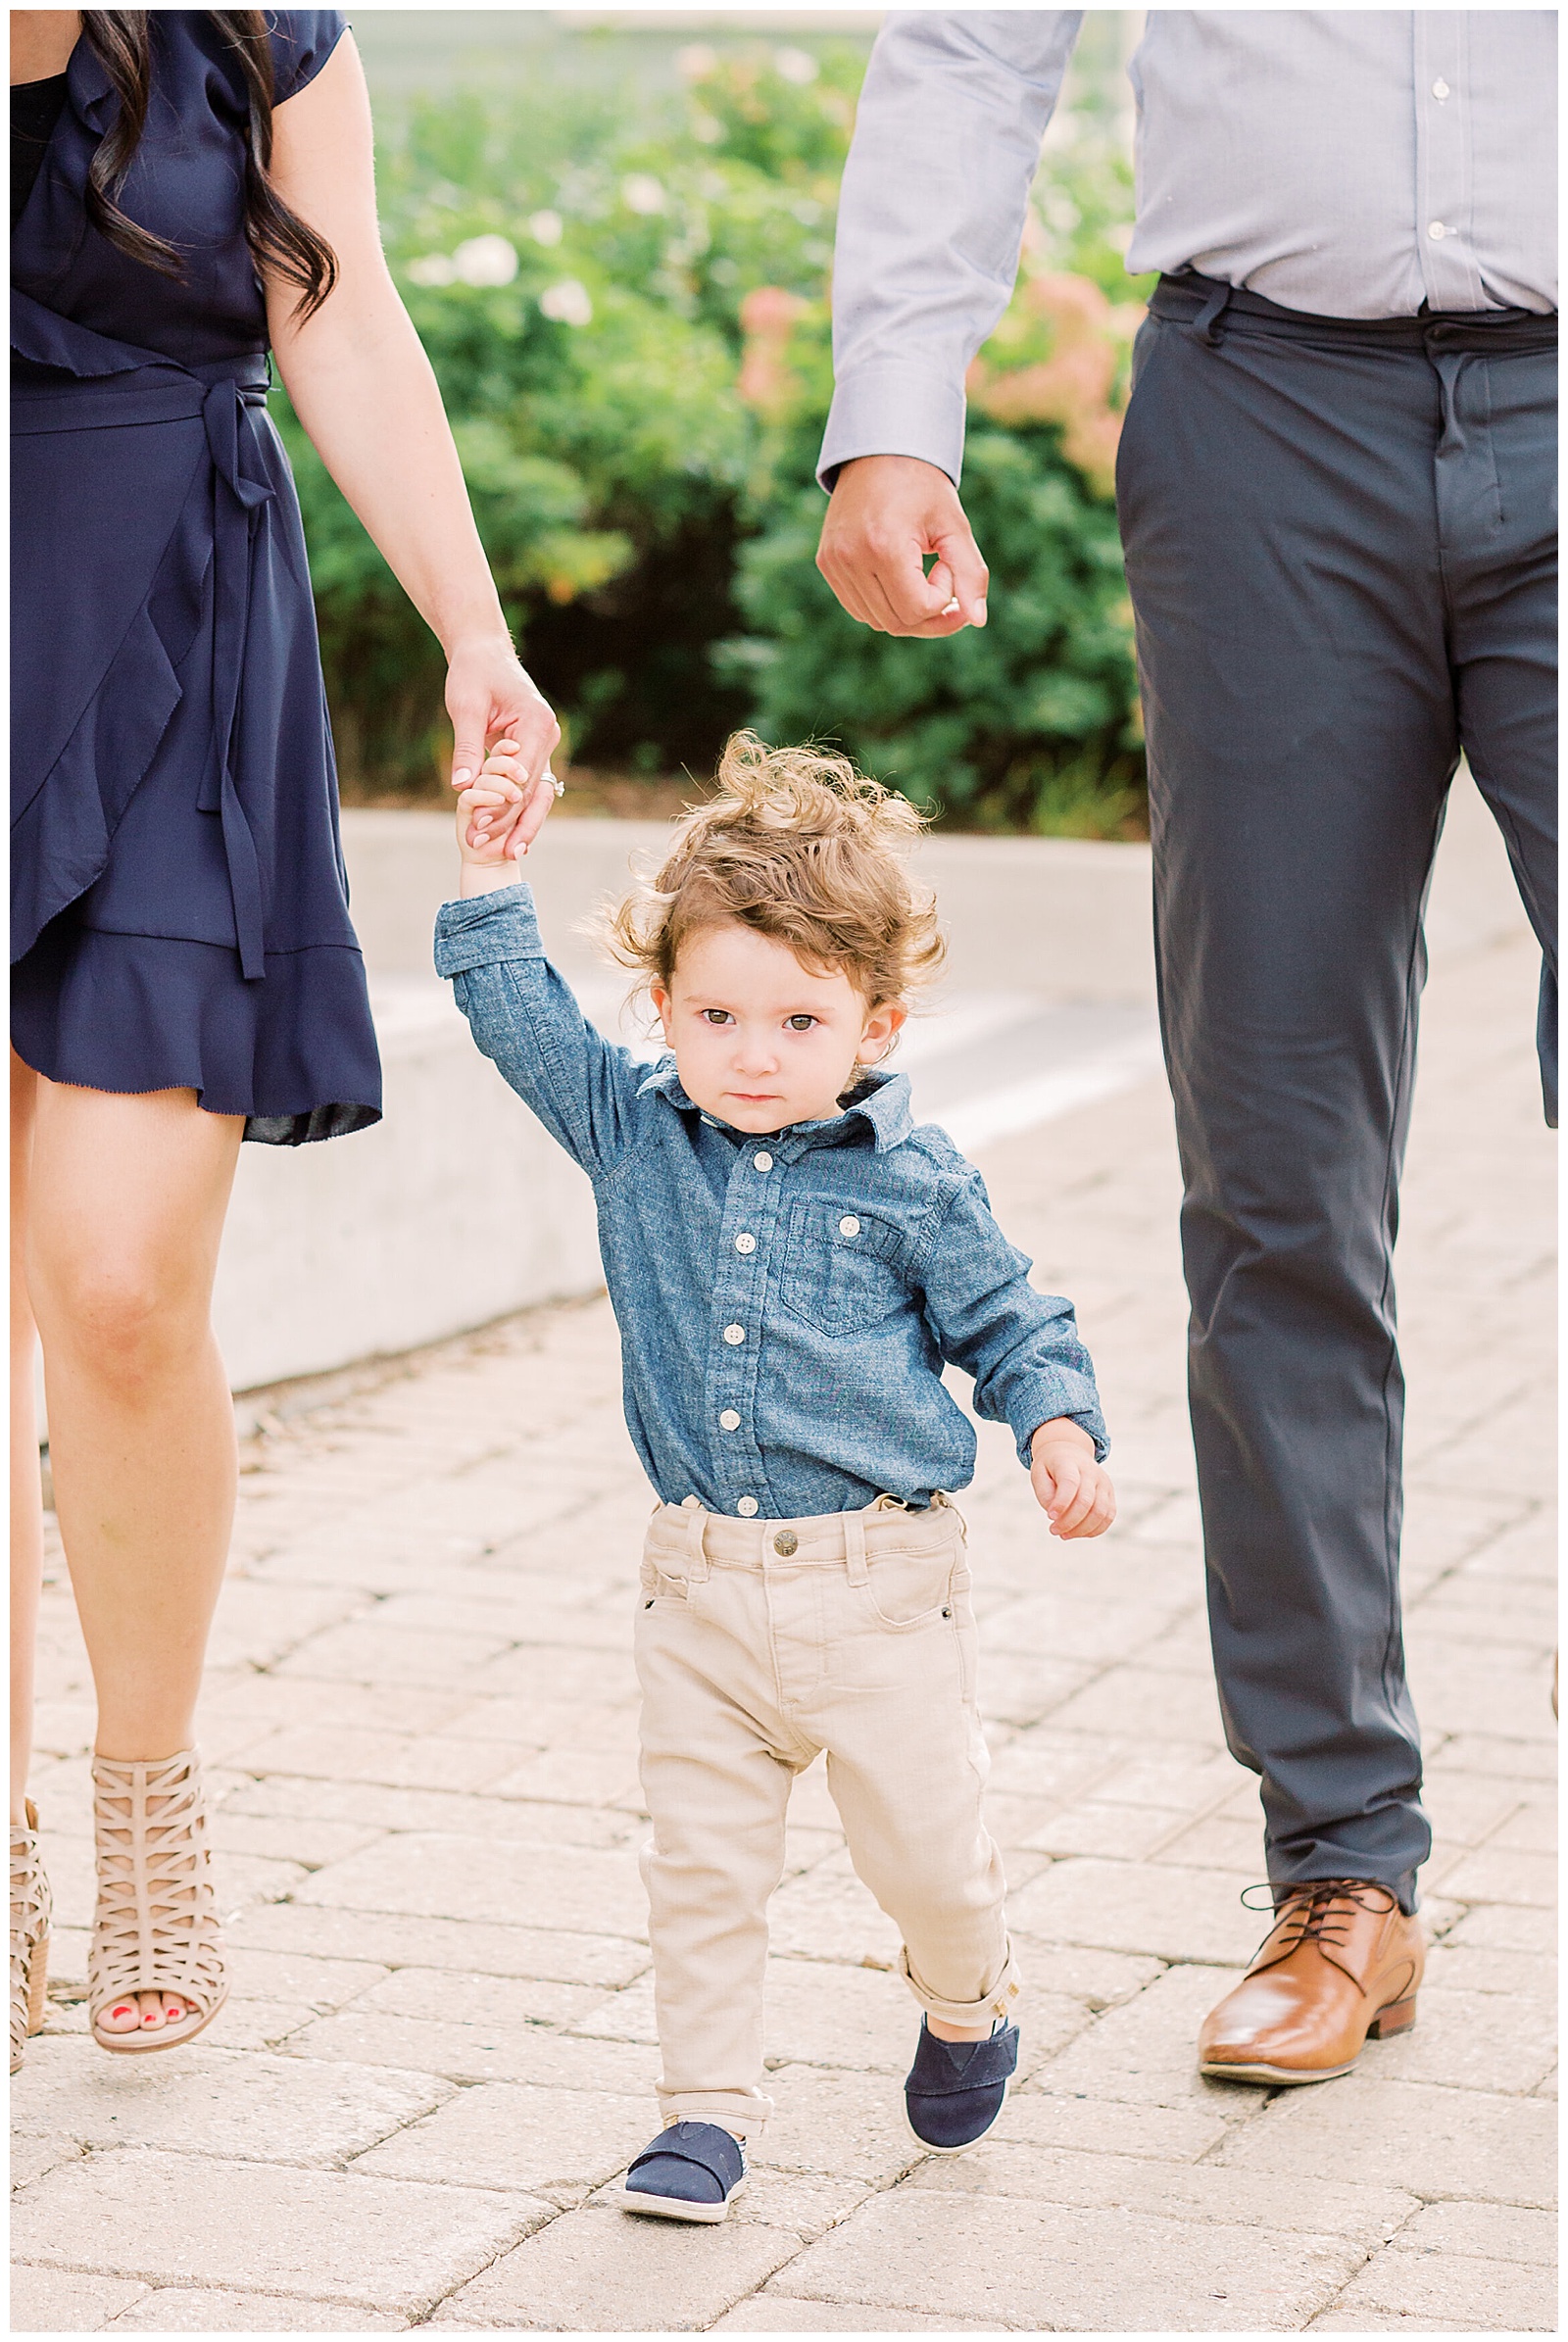 Small boy holding mom's hand while walking